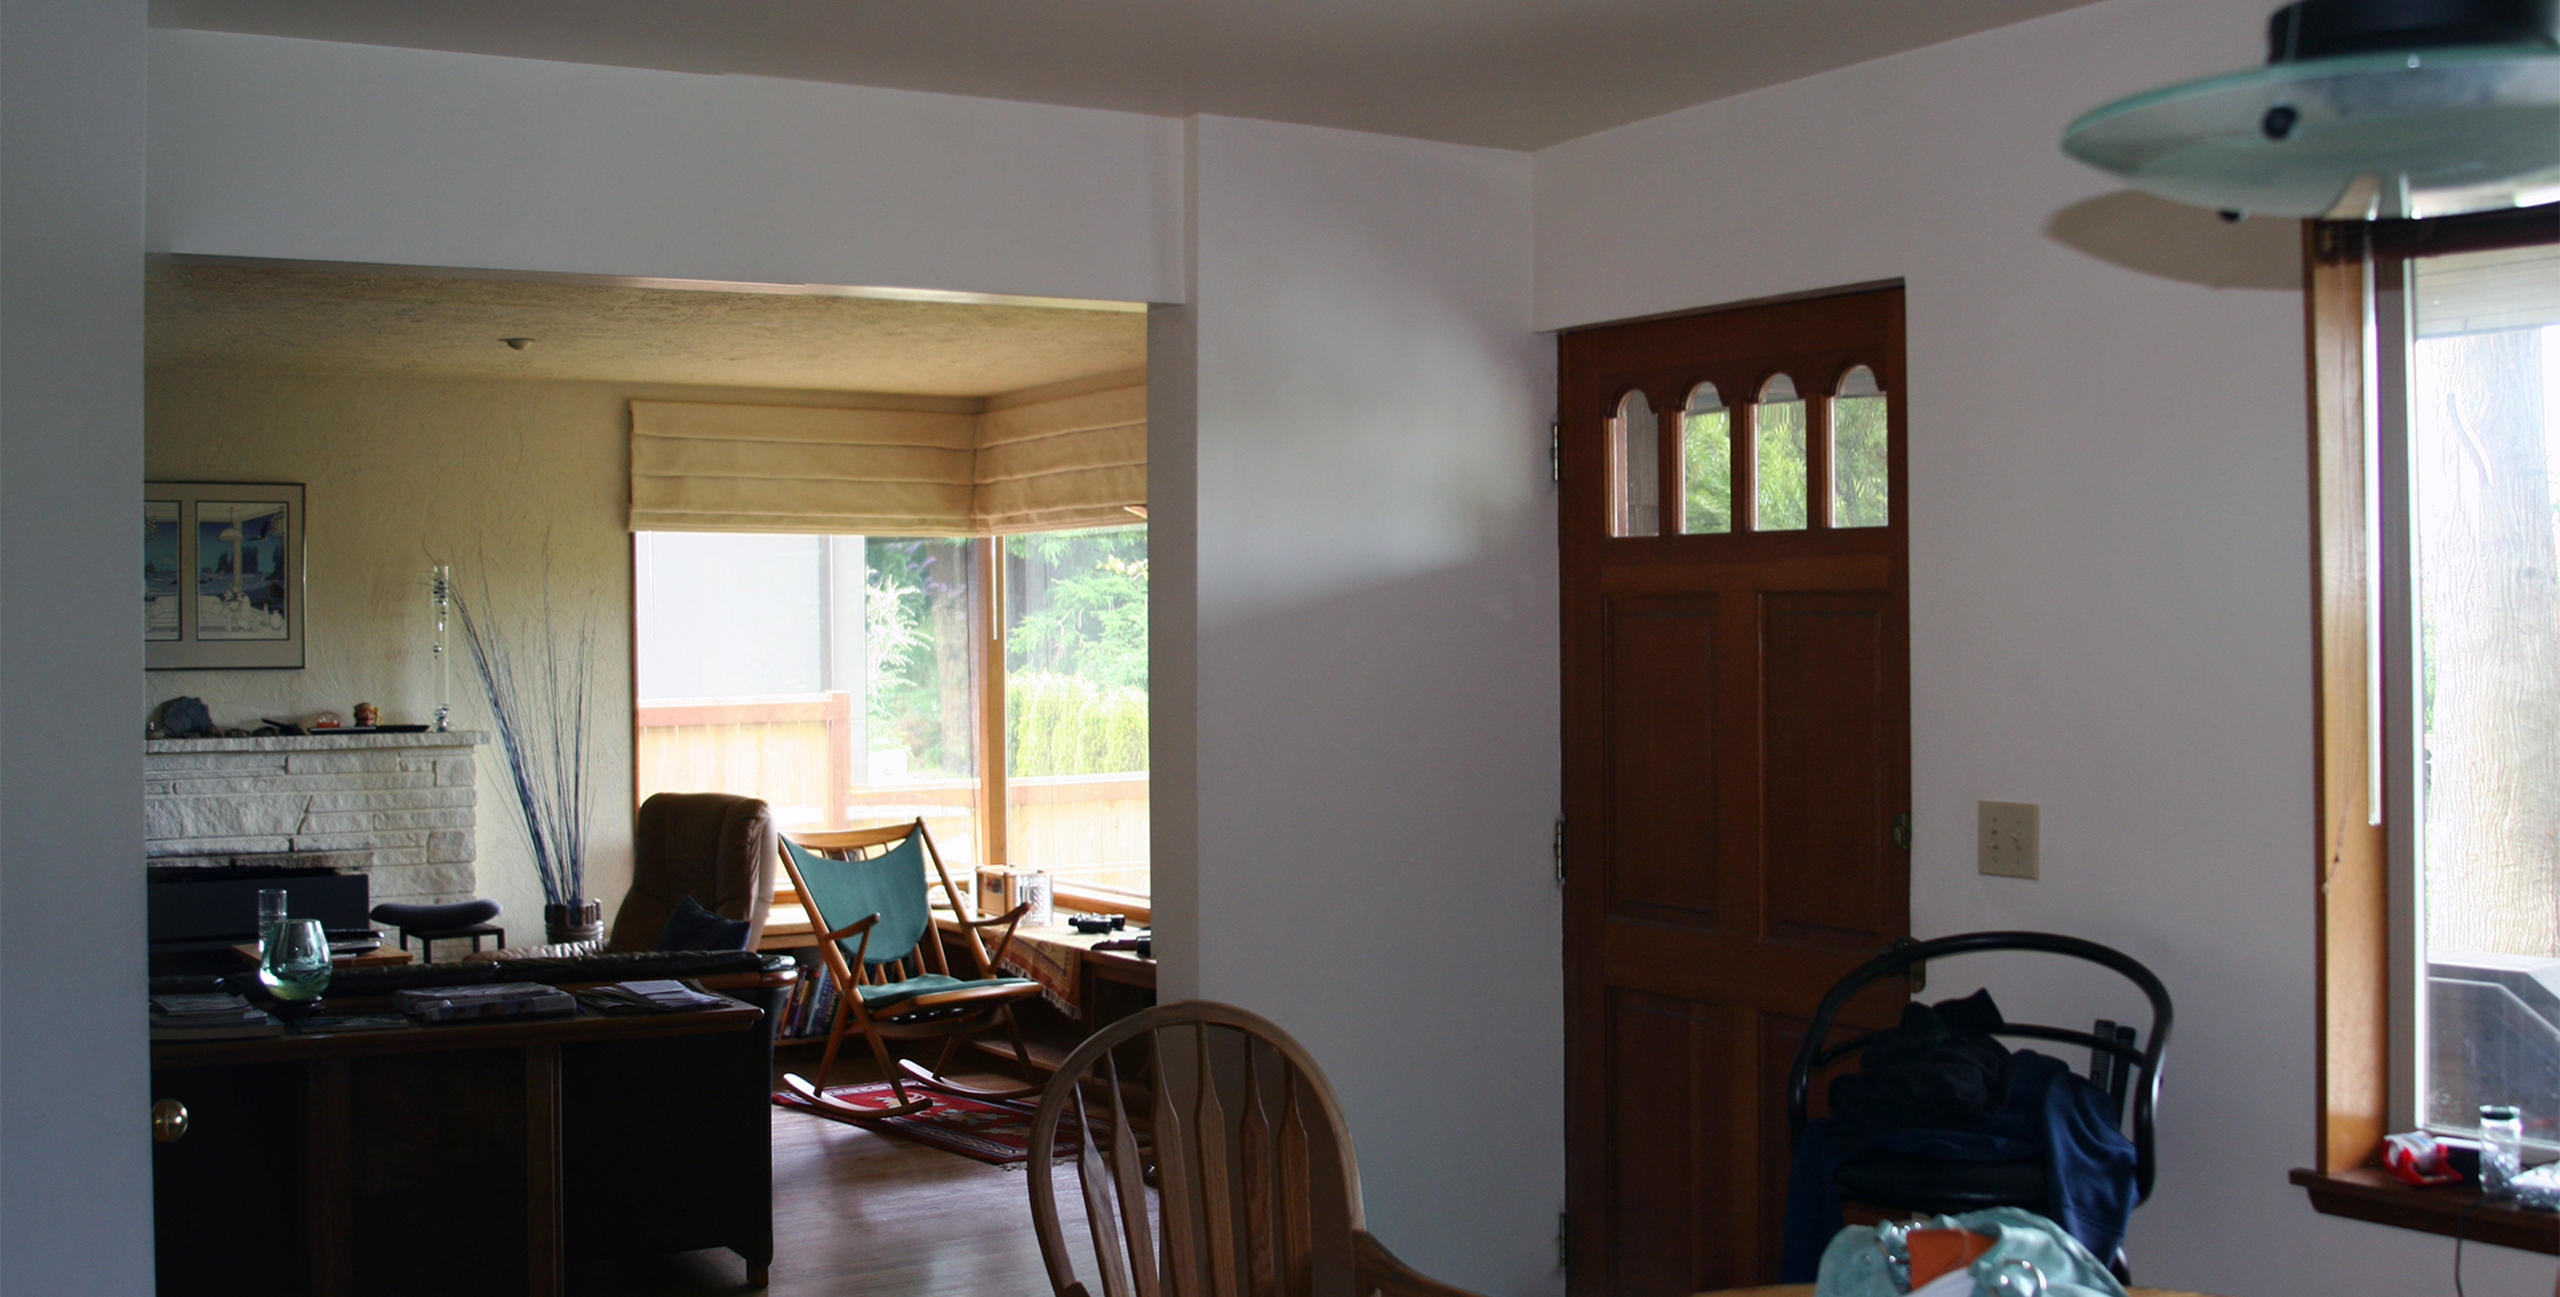 92nd Street Remodel & Addition - Before and After Remodel Photos: View to the Northwest from the Dining Room, Before